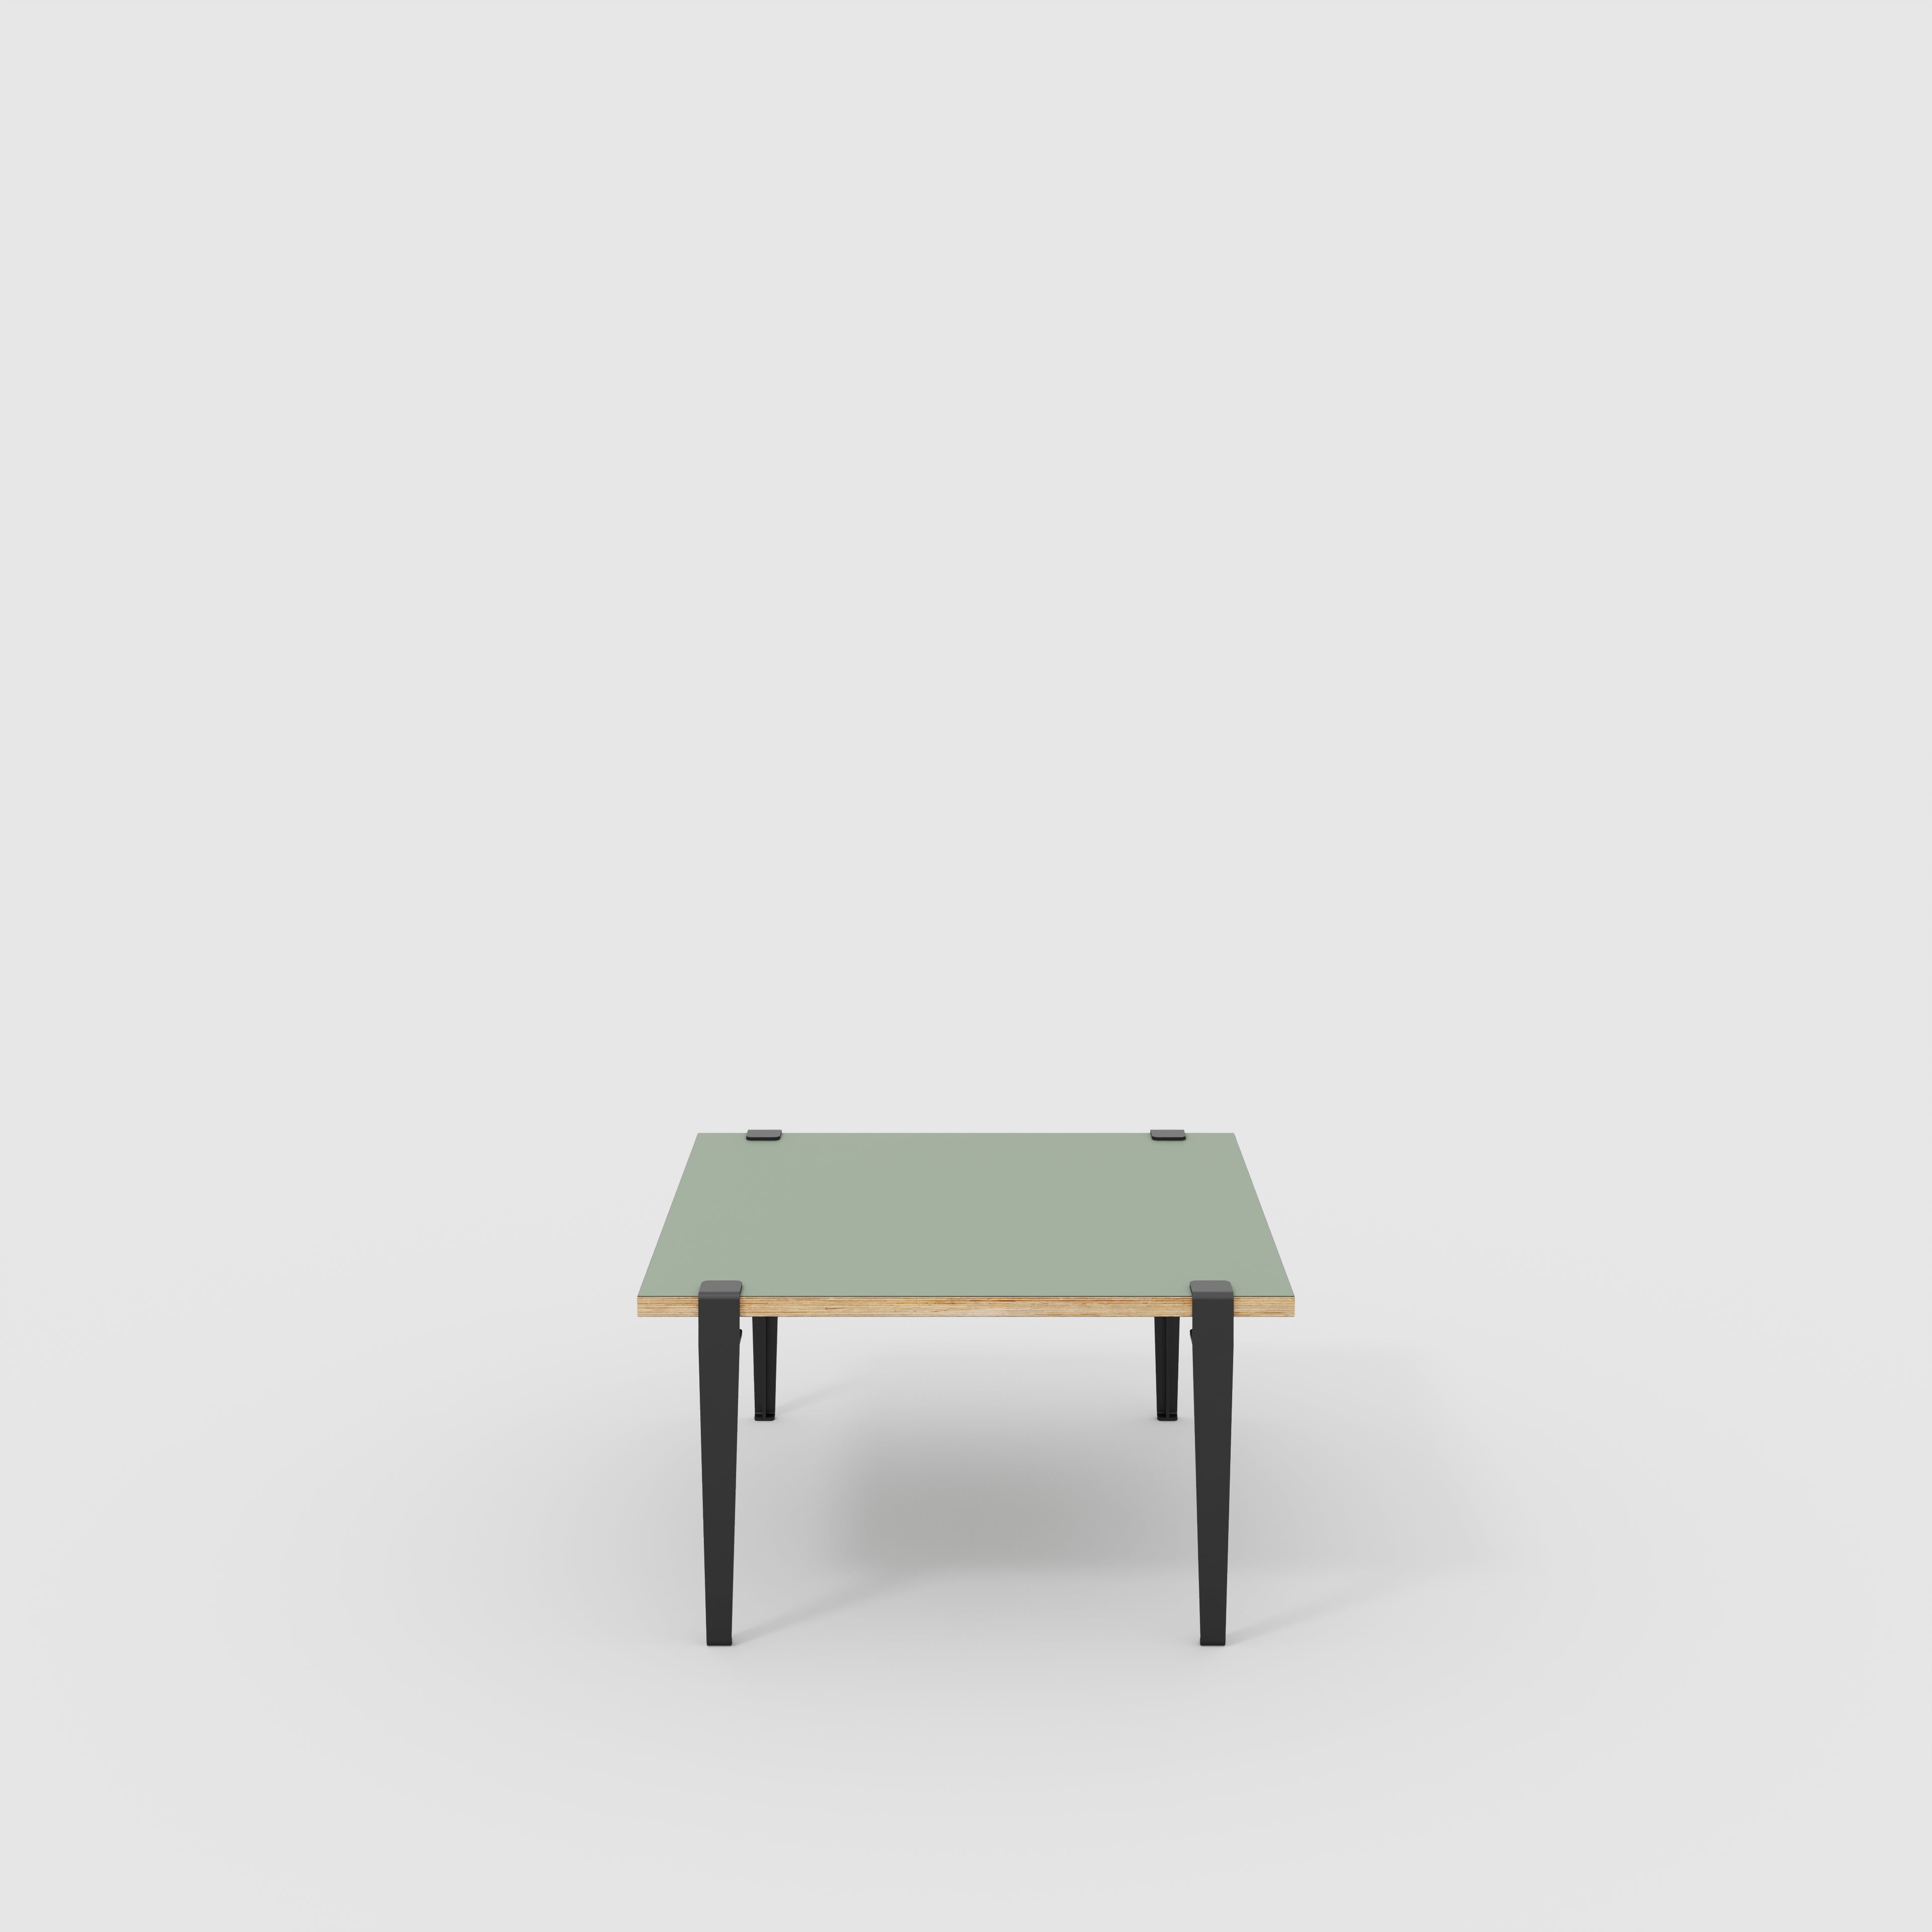 Coffee Table with Black Tiptoe Legs - Formica Green Slate - 800(w) x 800(d) x 430(h)